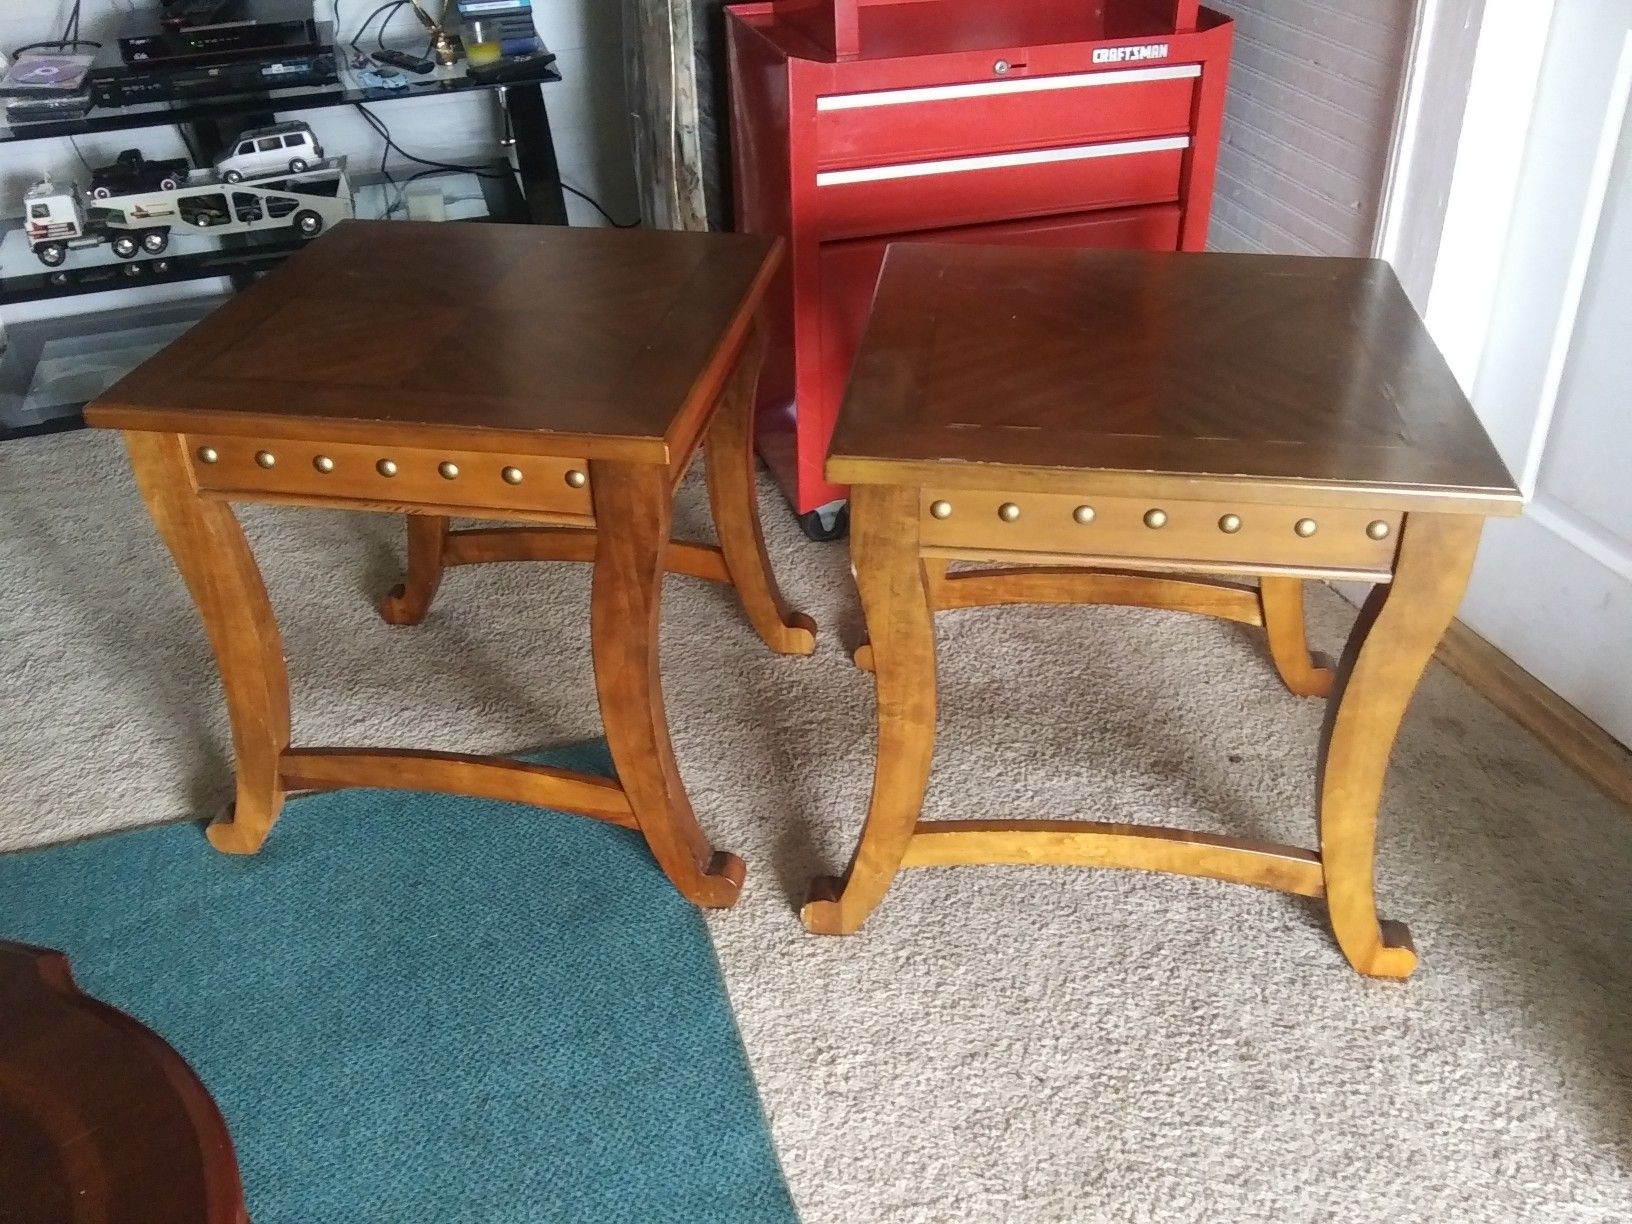 Two small tables $25 each